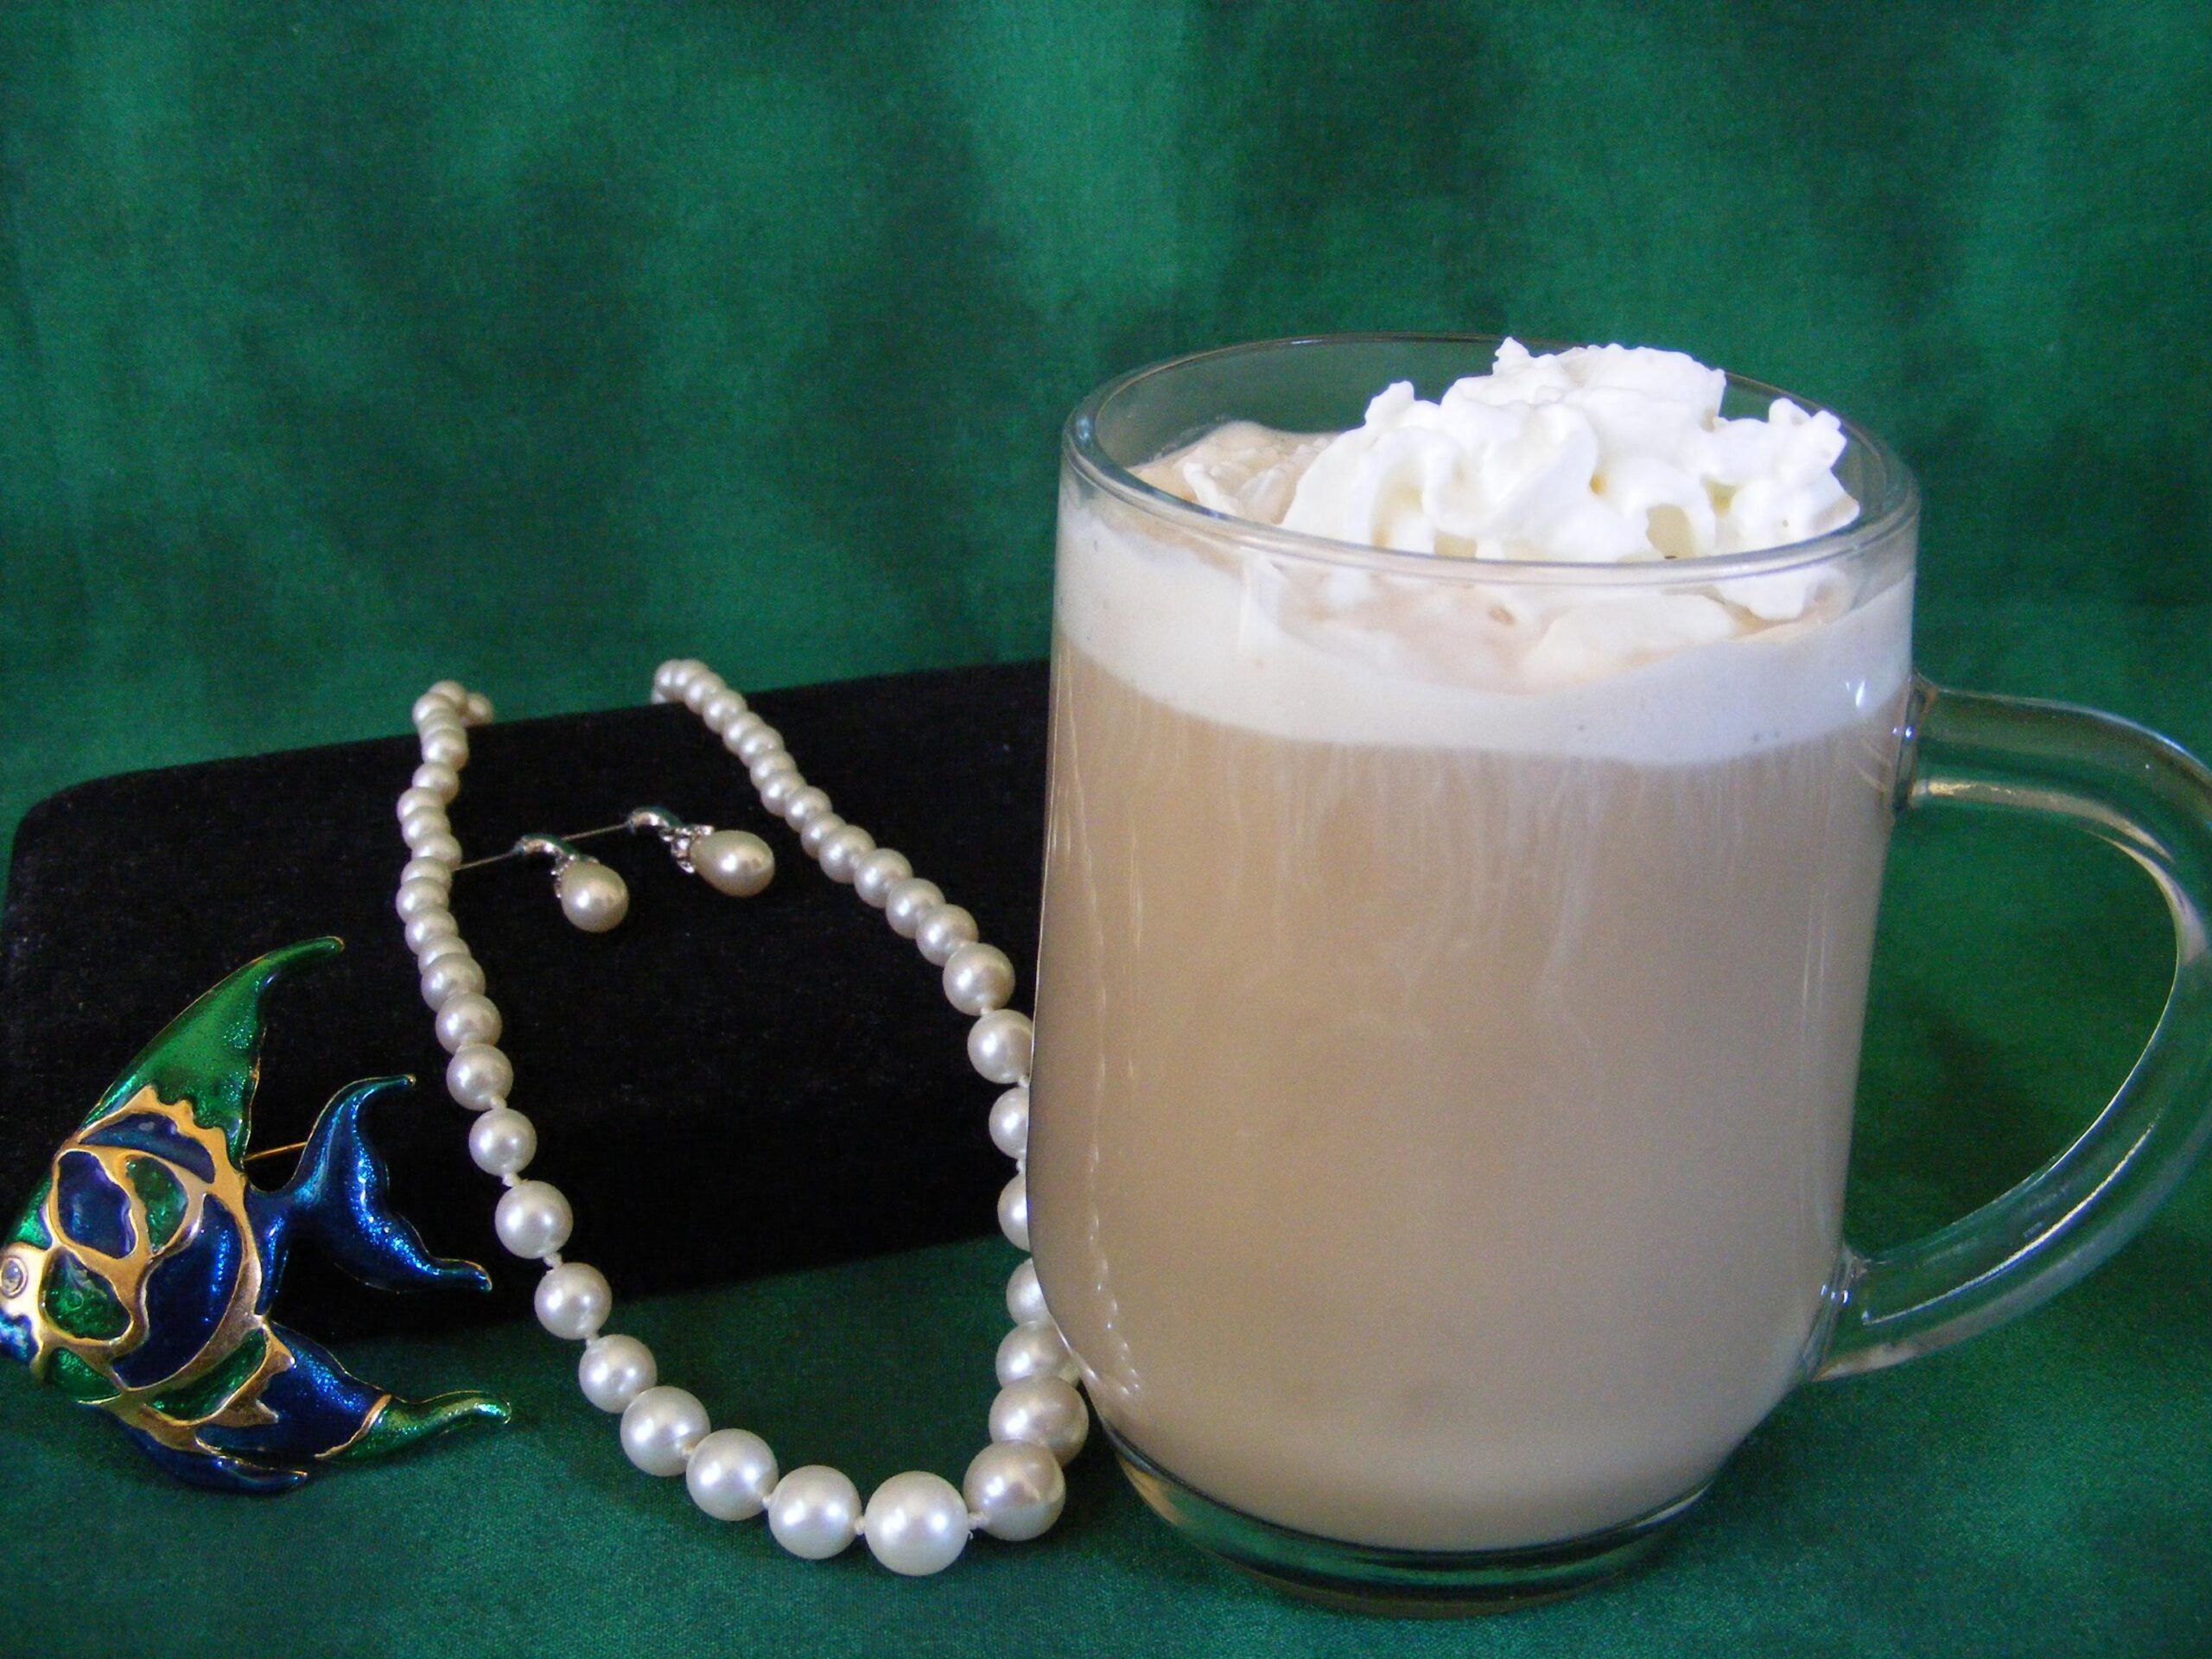  The perfect blend of Irish whiskey and vanilla, this coffee will warm your soul and heart.